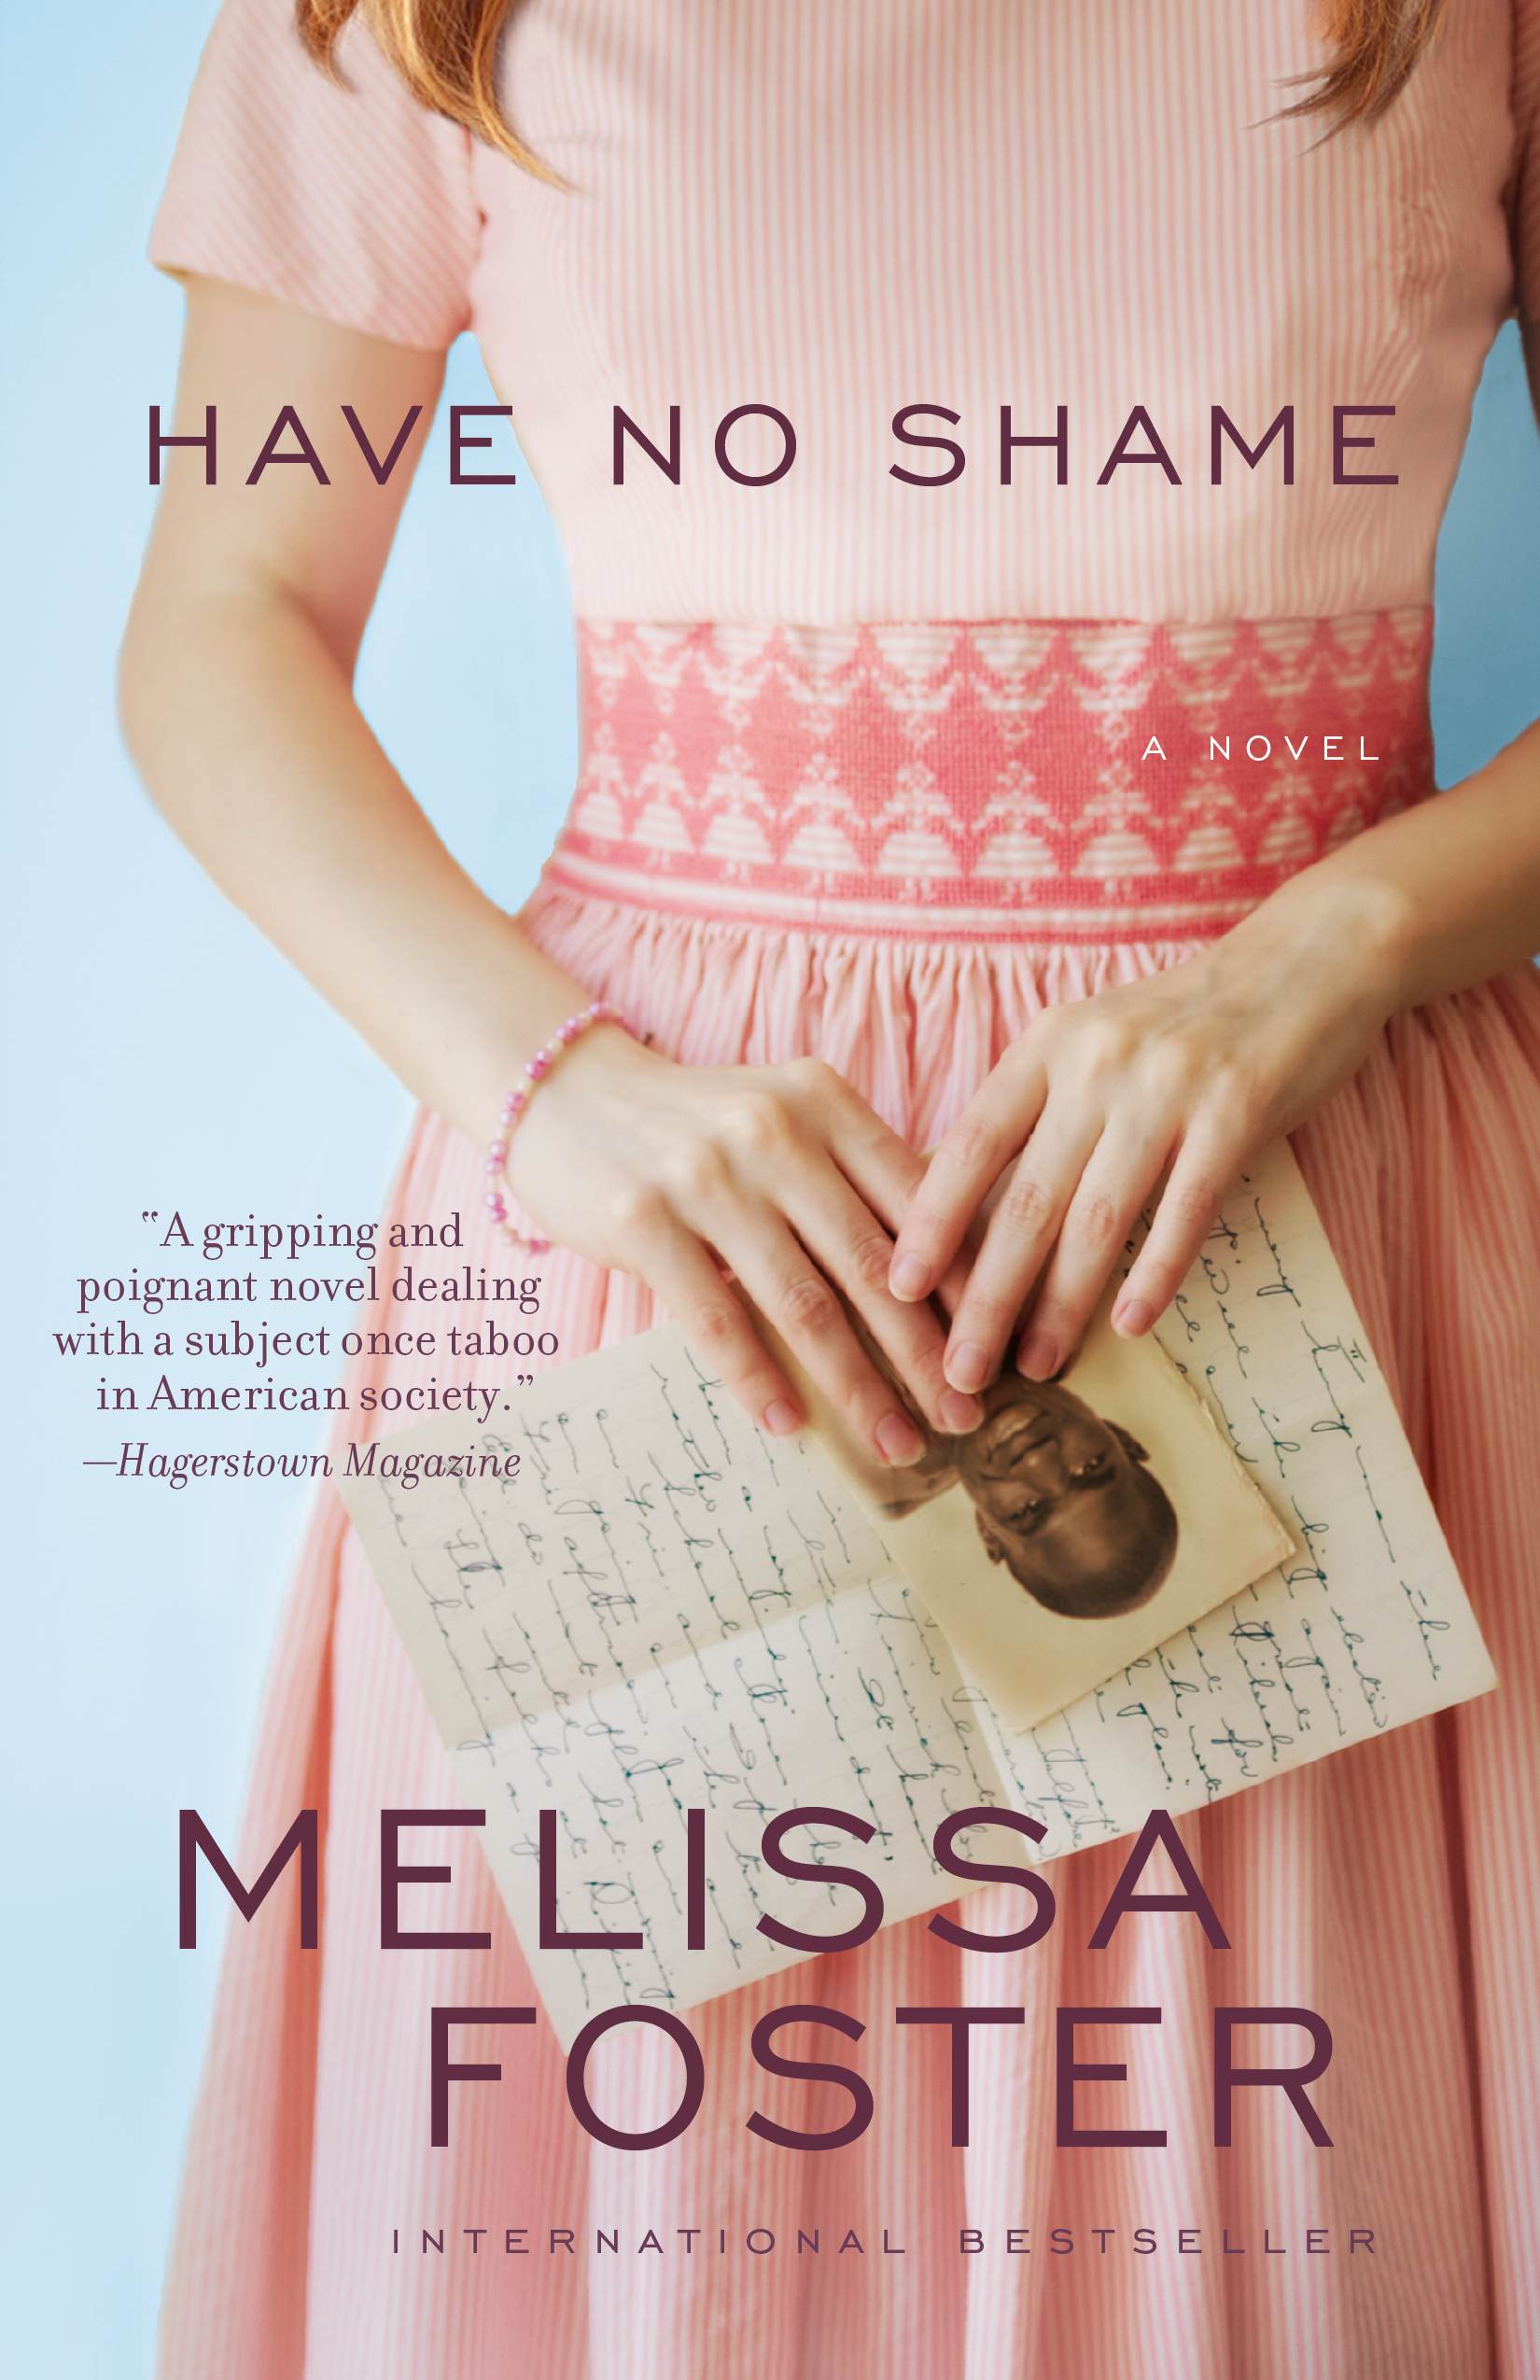 Author Melissa Foster Shares Latest Book: Have No Shame